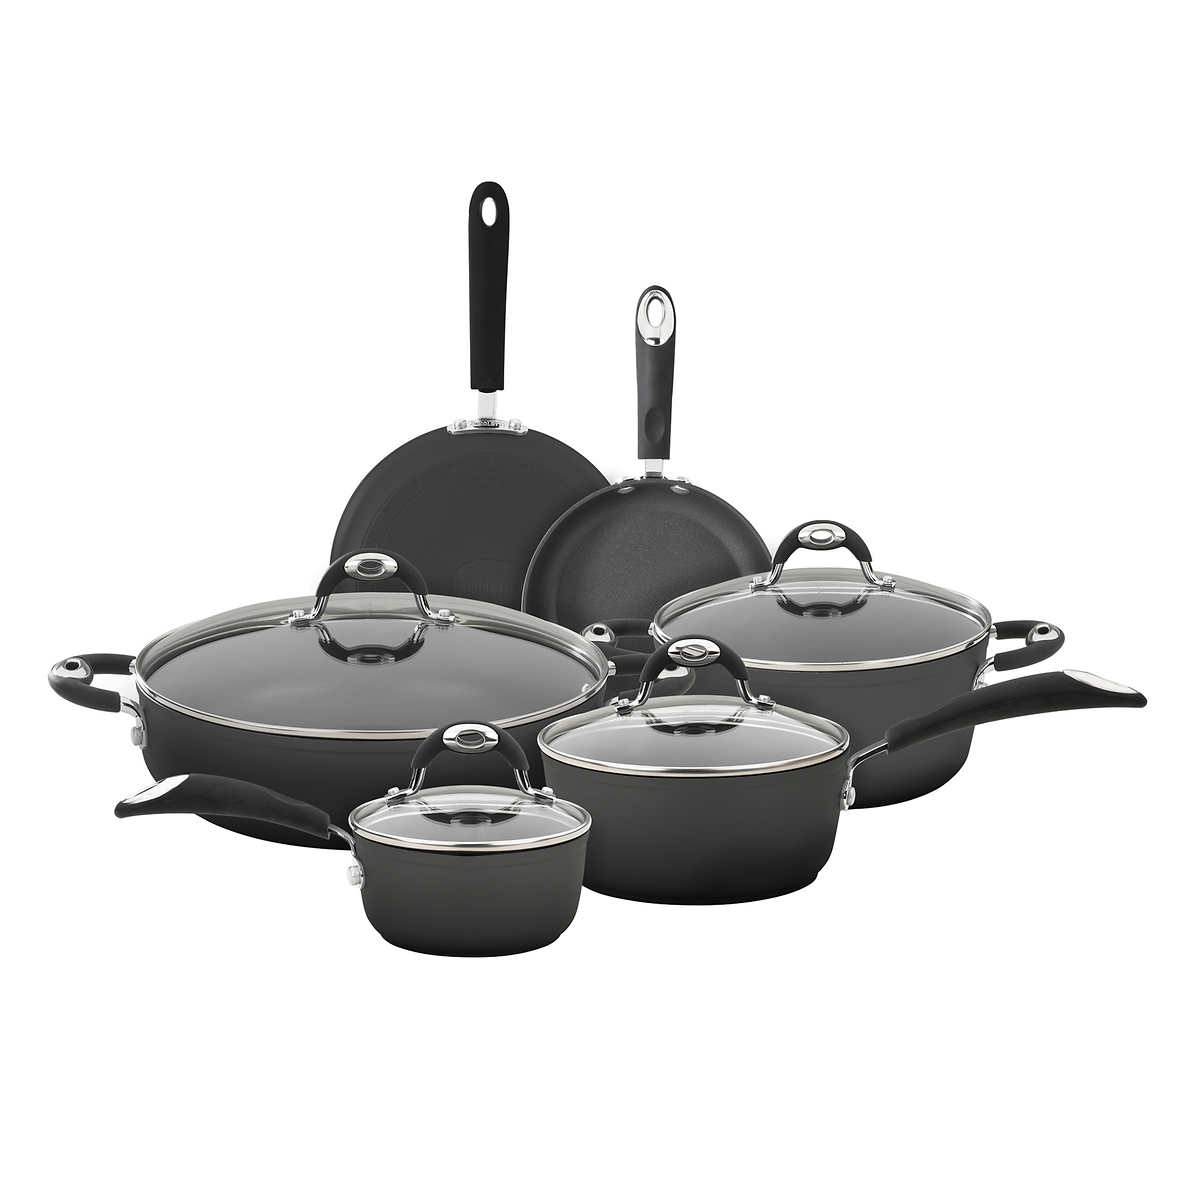 Bialetti Black Infinity, 8 Piece Cookware and Frying Brazil